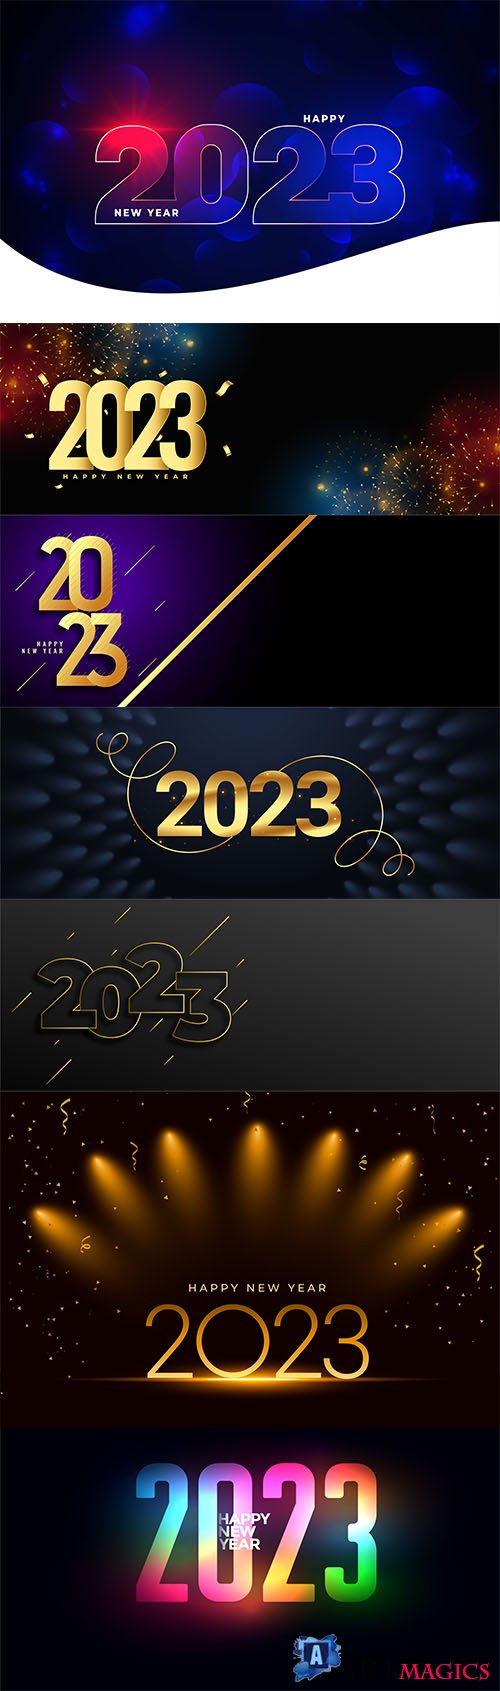 Golden 2023 text with spot light effect for new year banner